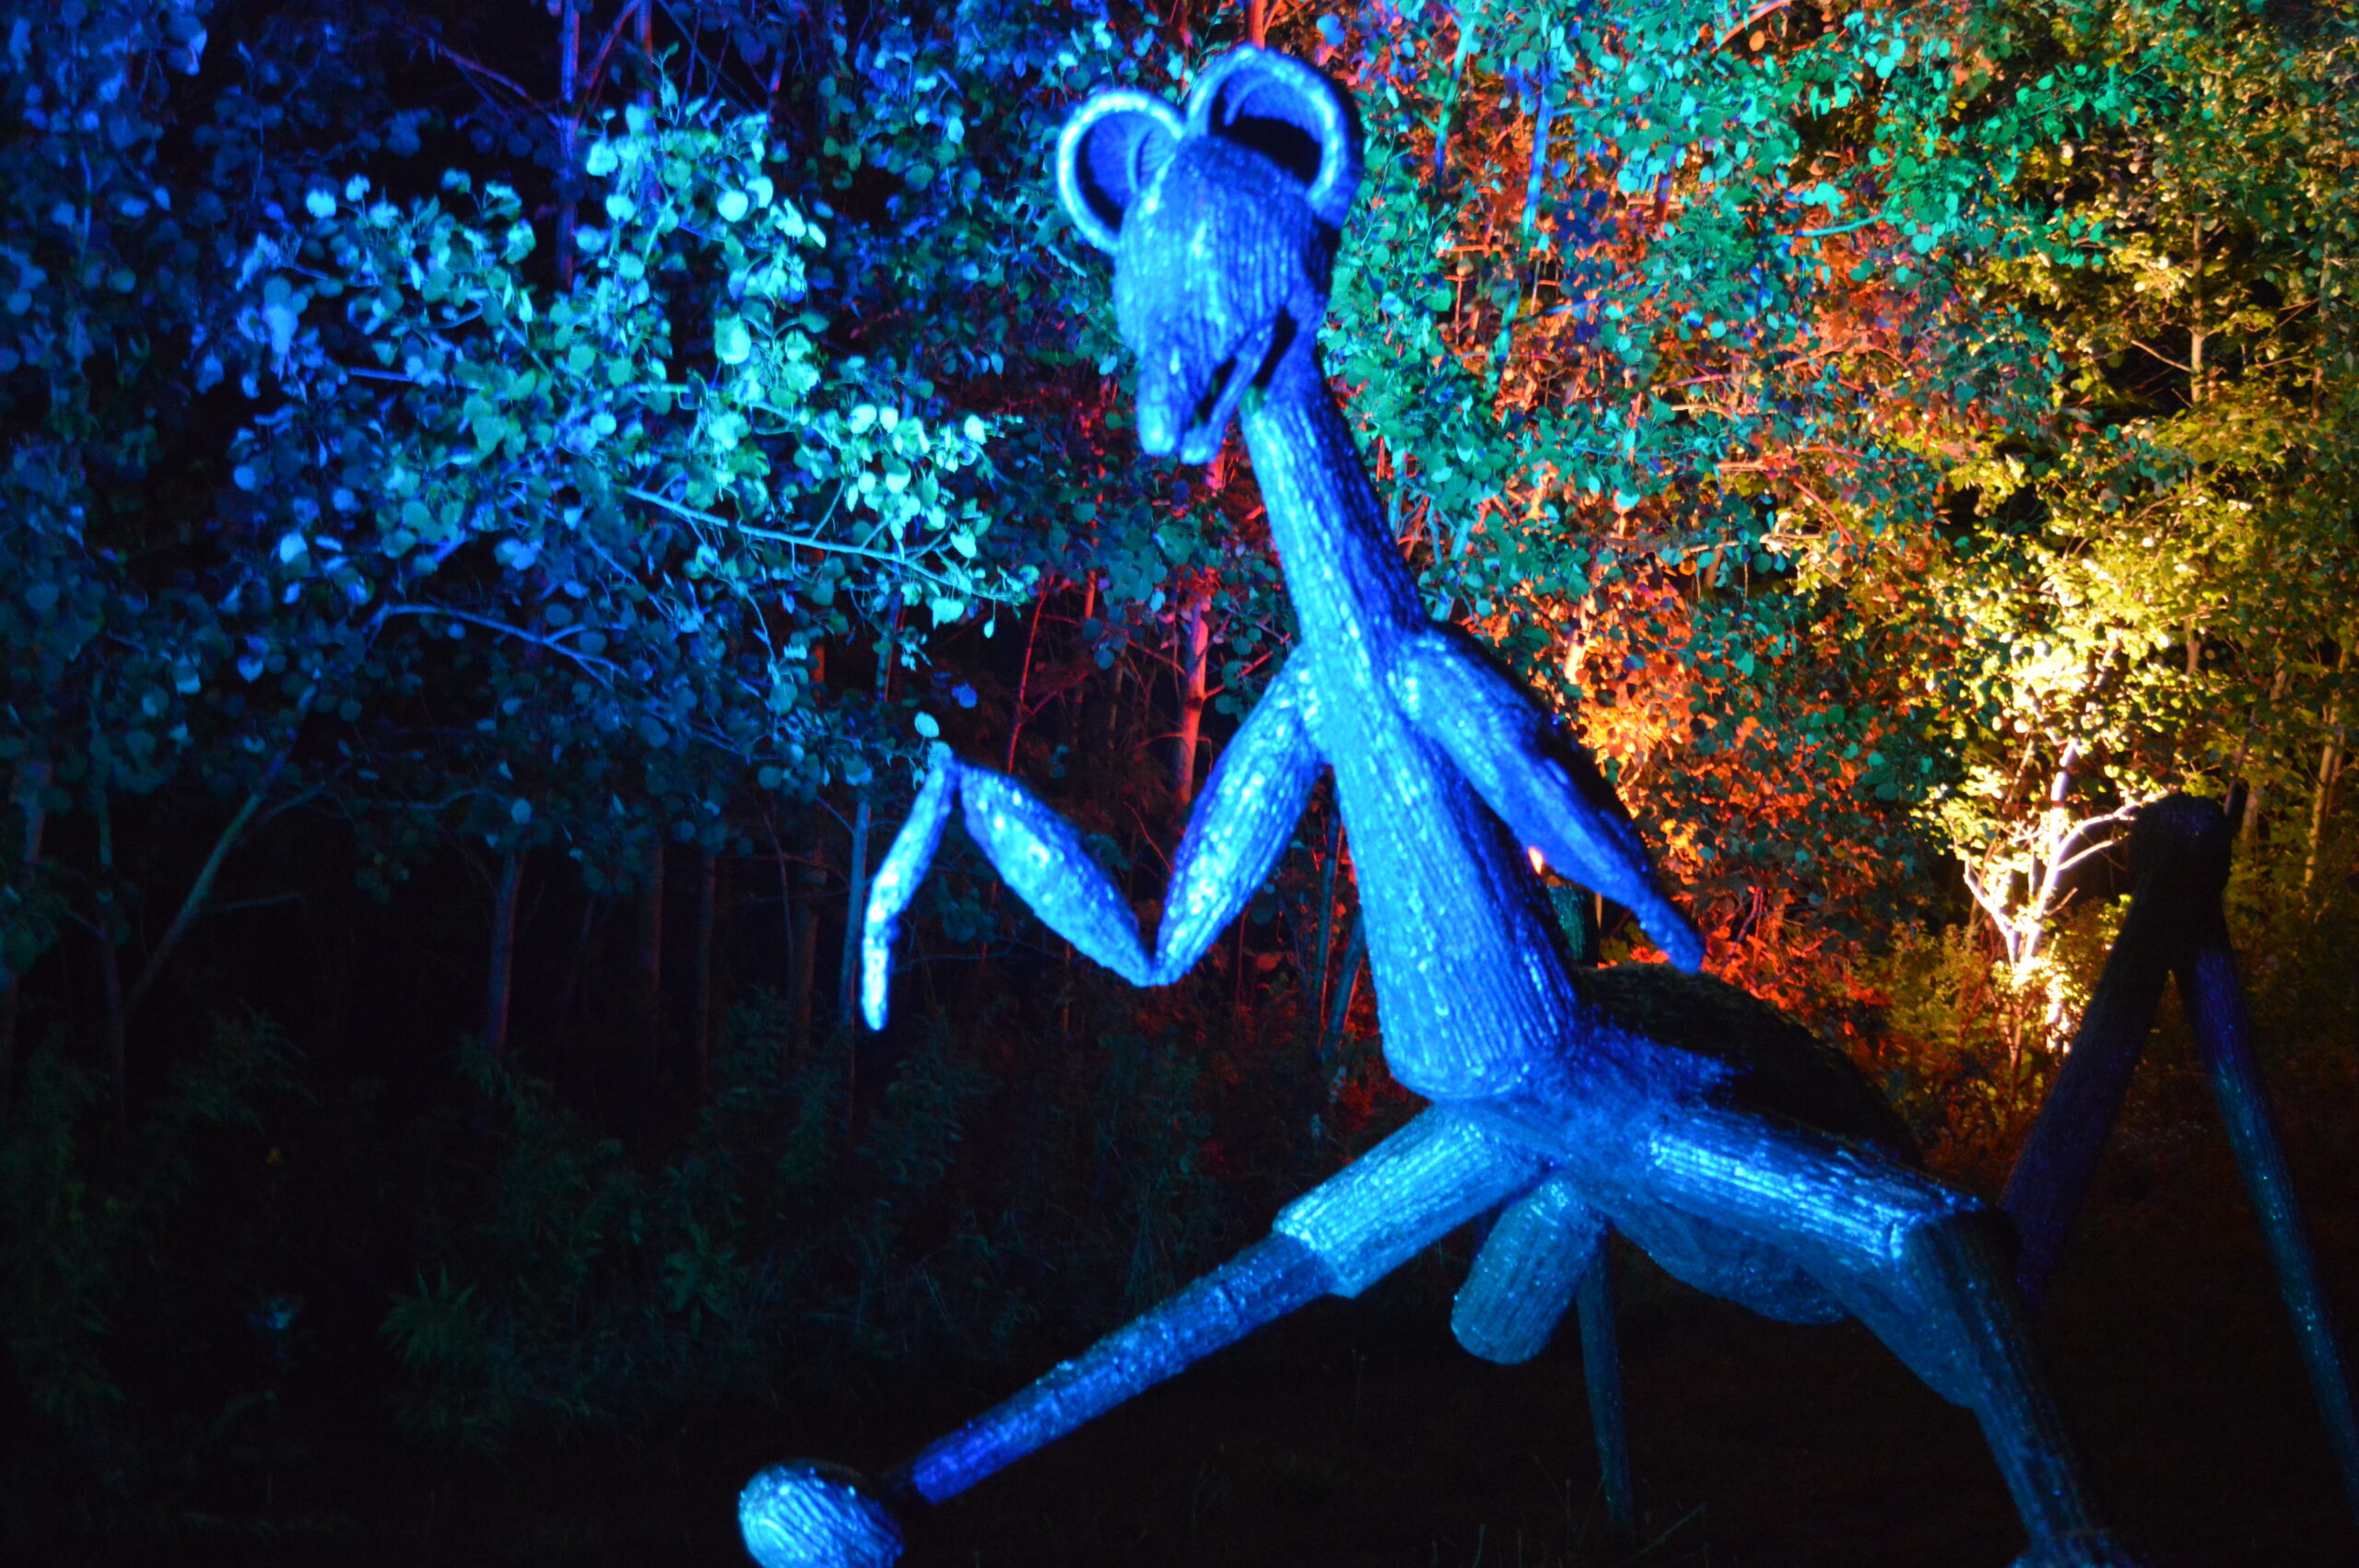 NIGHT LIGHTS at Griffis Sculpture Park 2022 promo video